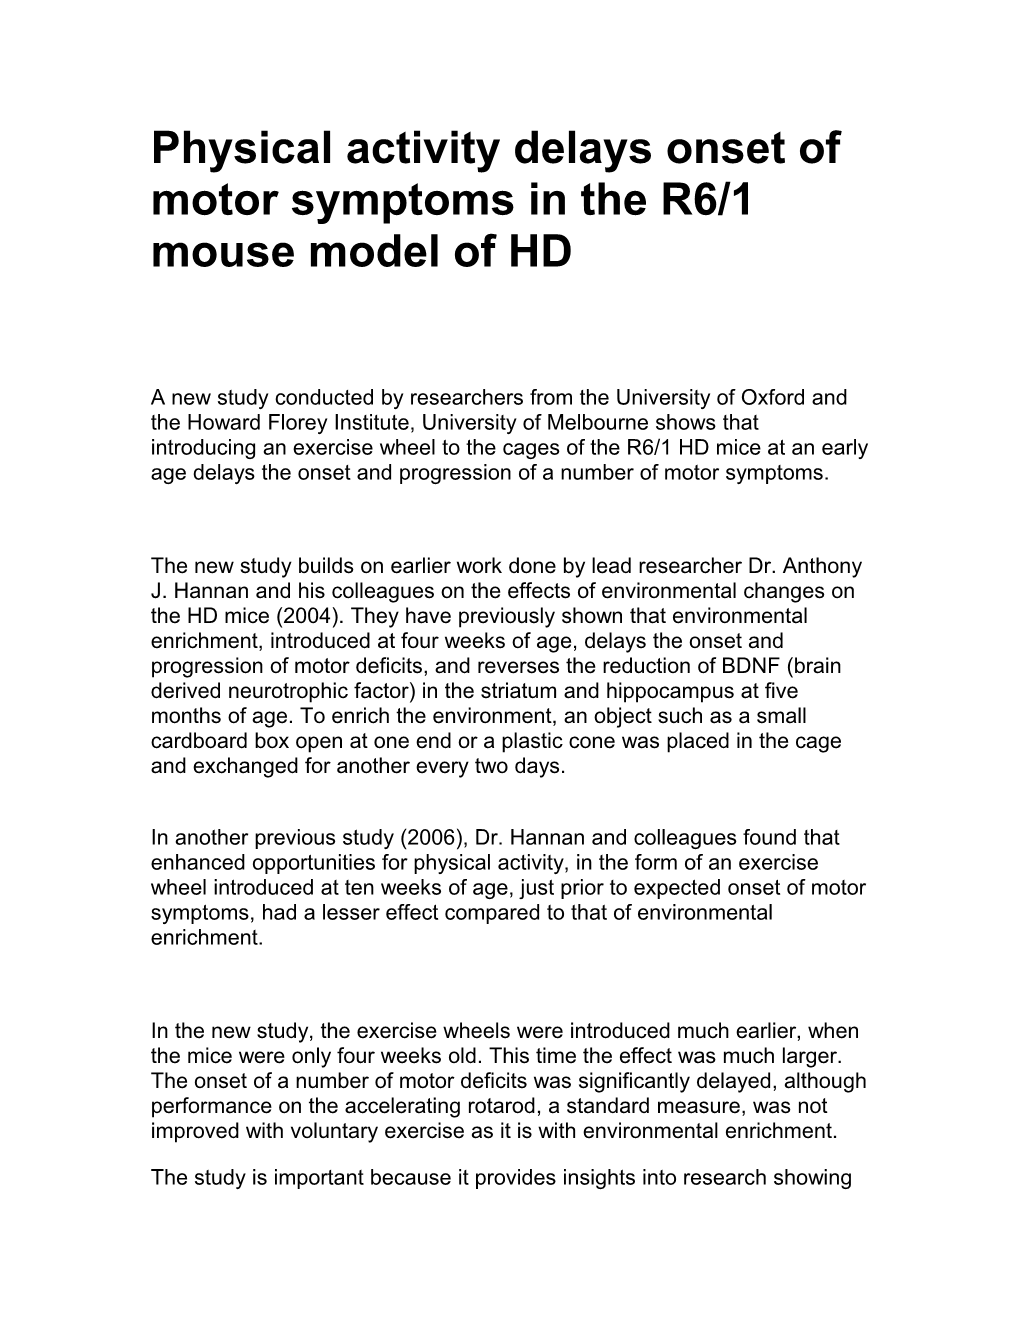 Physical Activity Delays Onset of Motor Symptoms in the R6/1 Mouse Model of HD